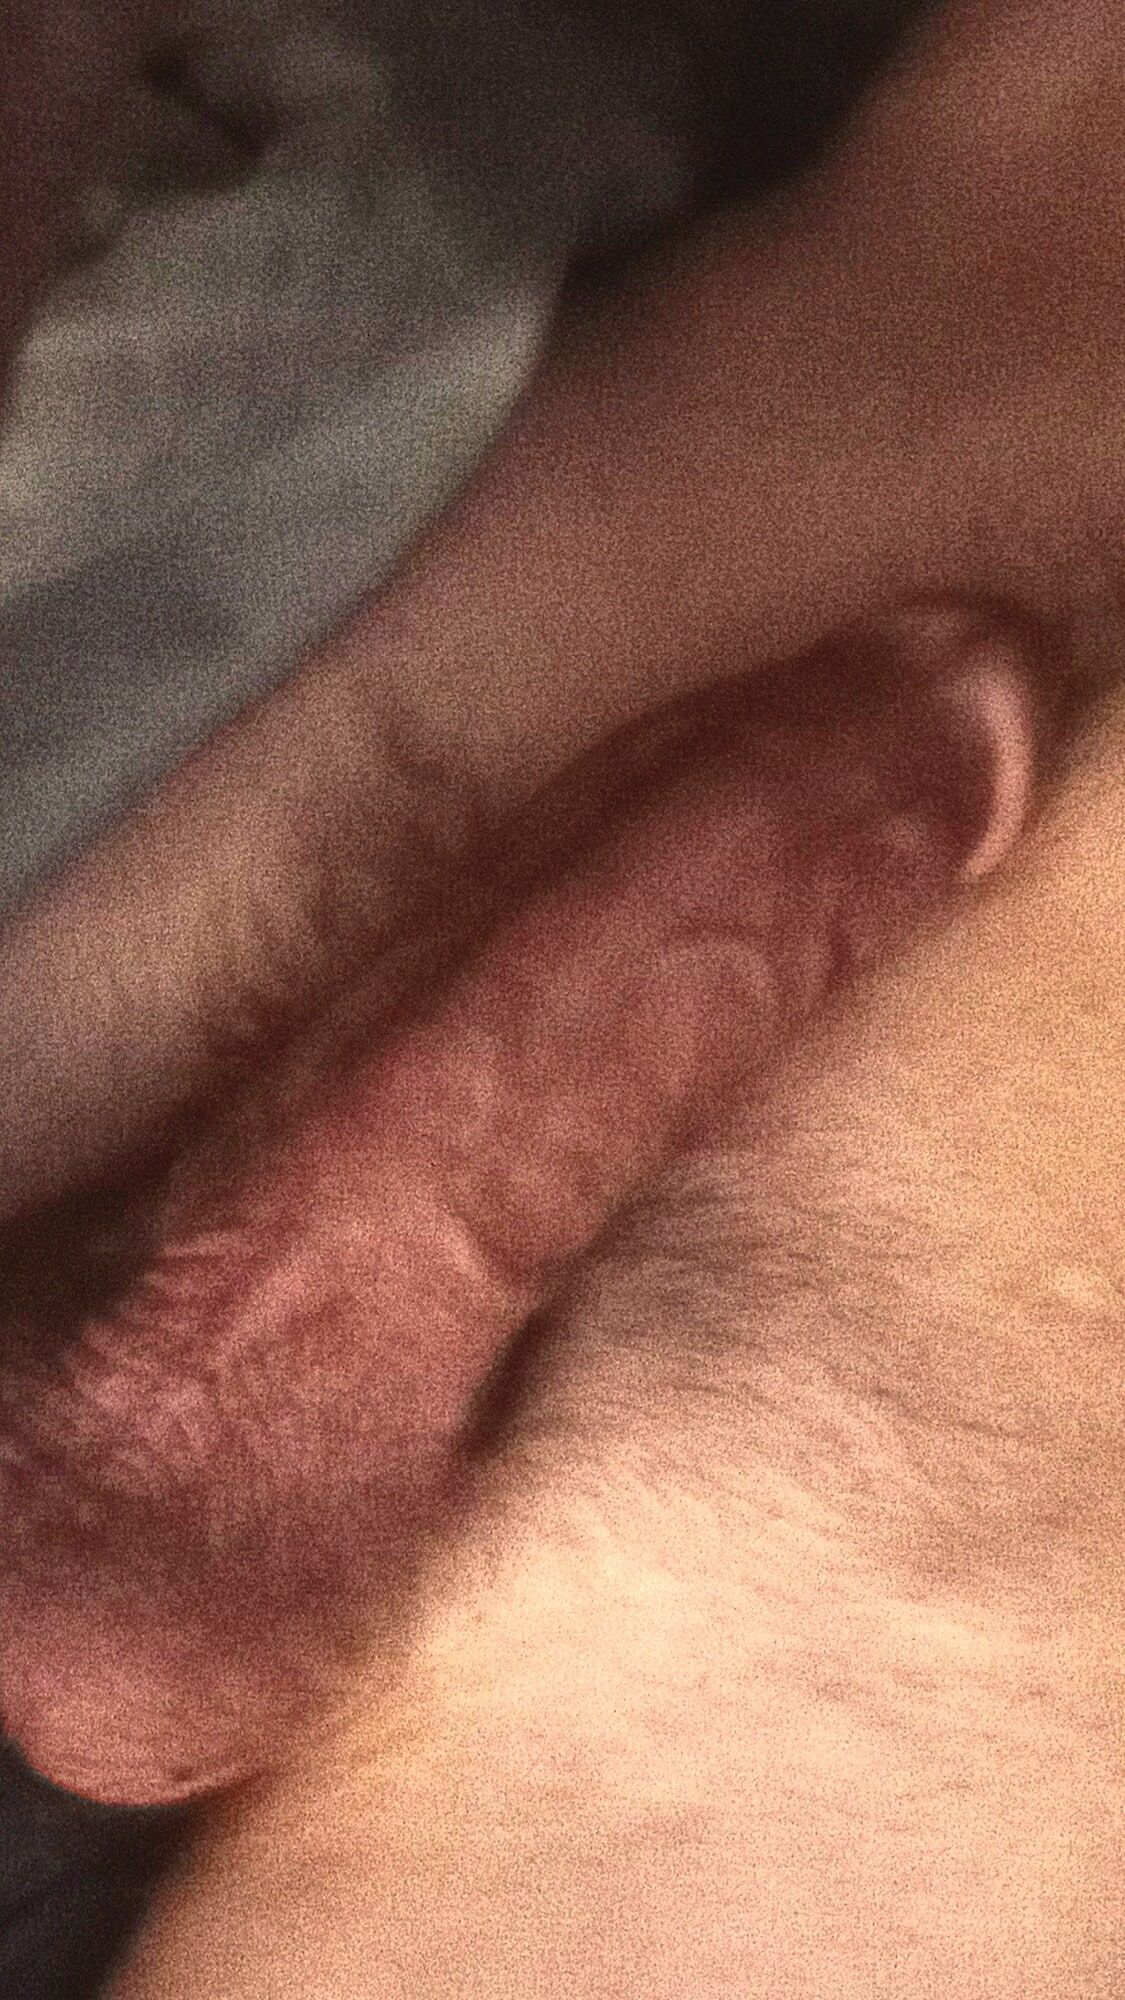 My cock  #3